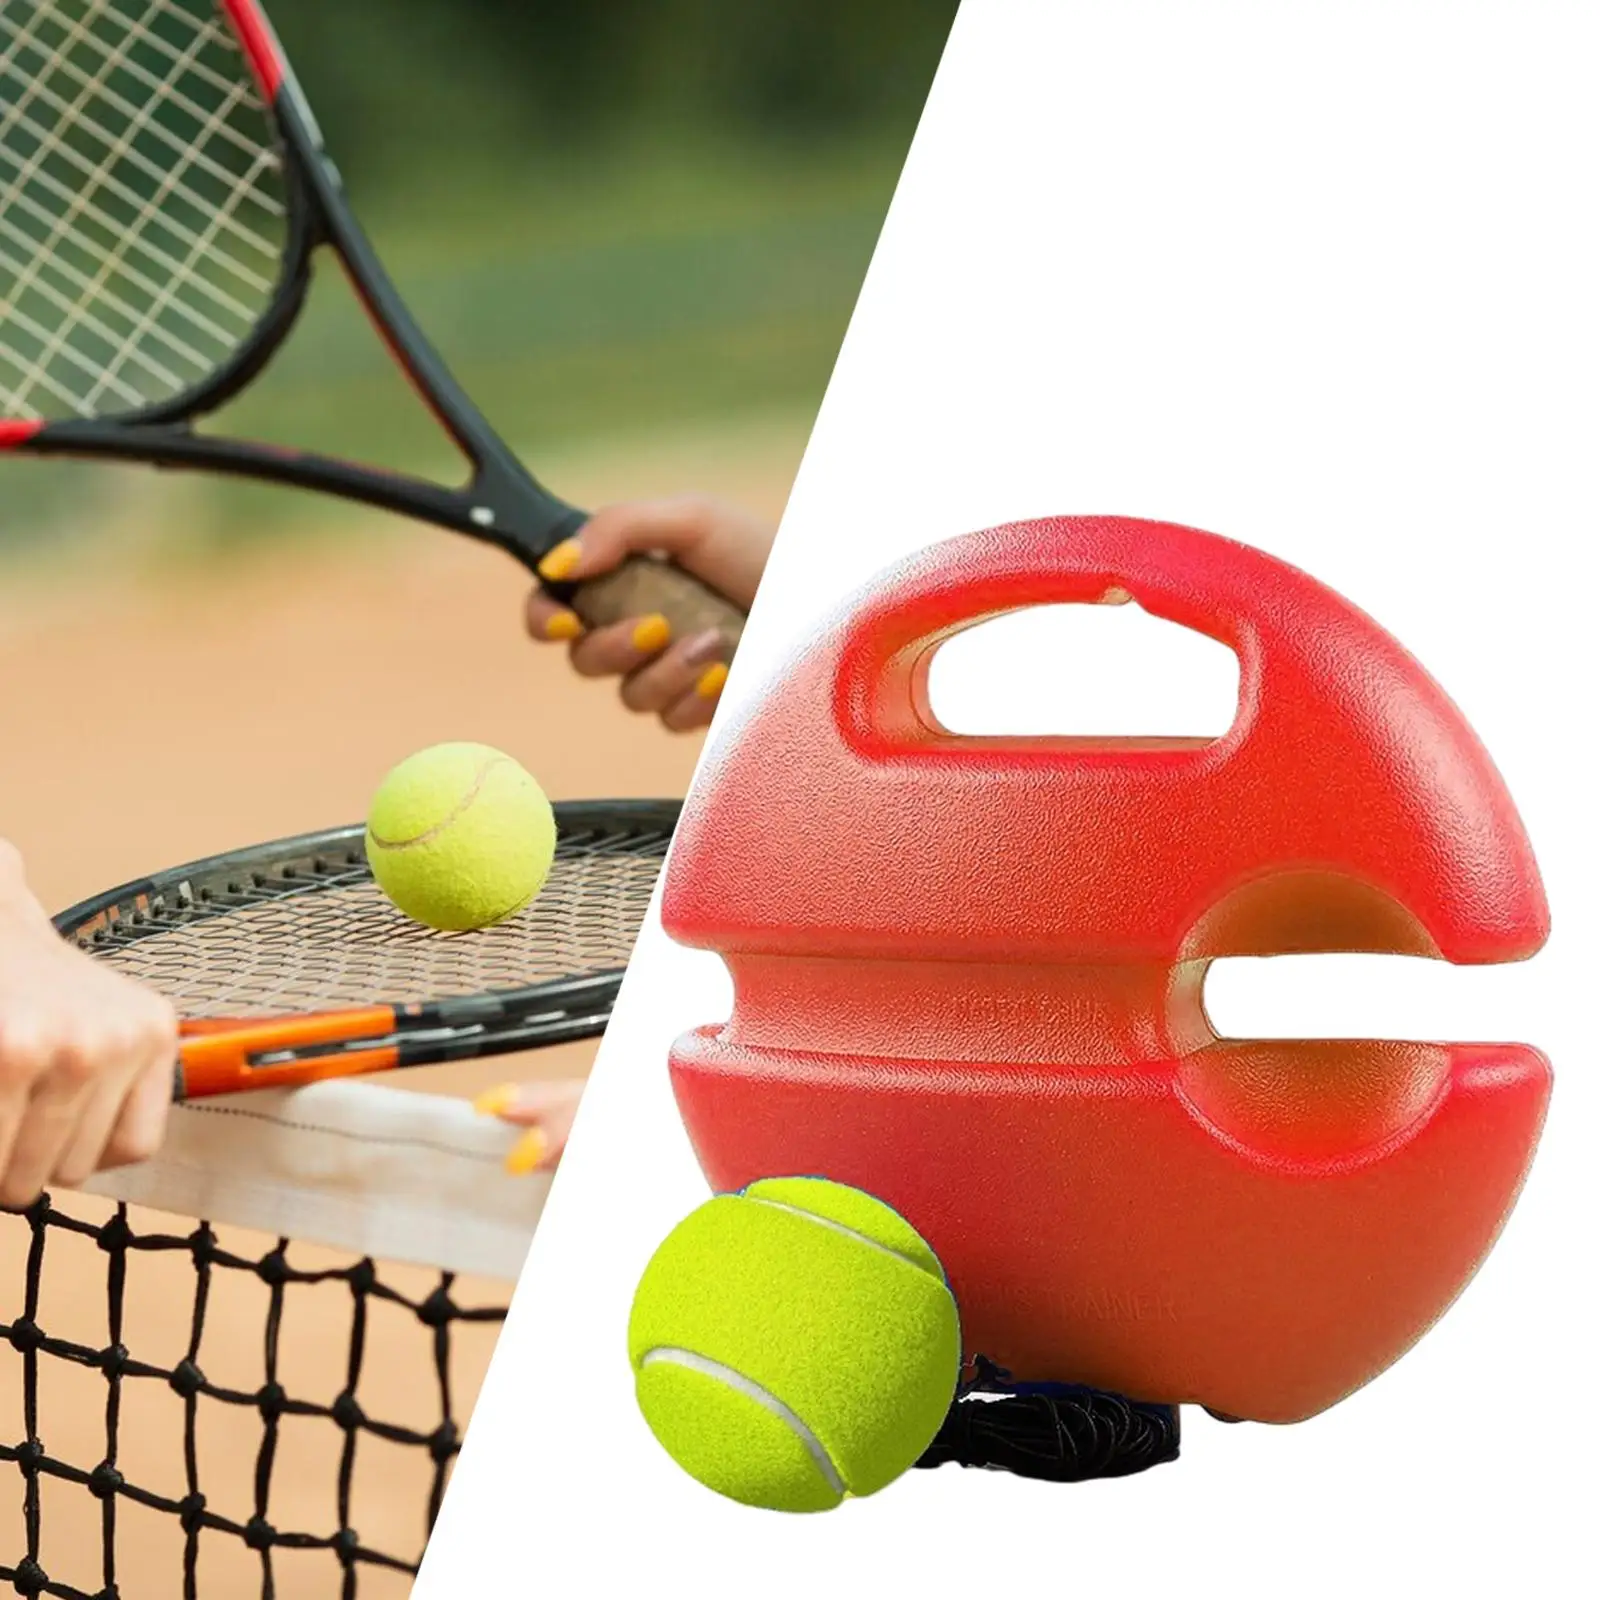 Tennis Trainer Tennis Training Aid for Player Beginners Individual Training